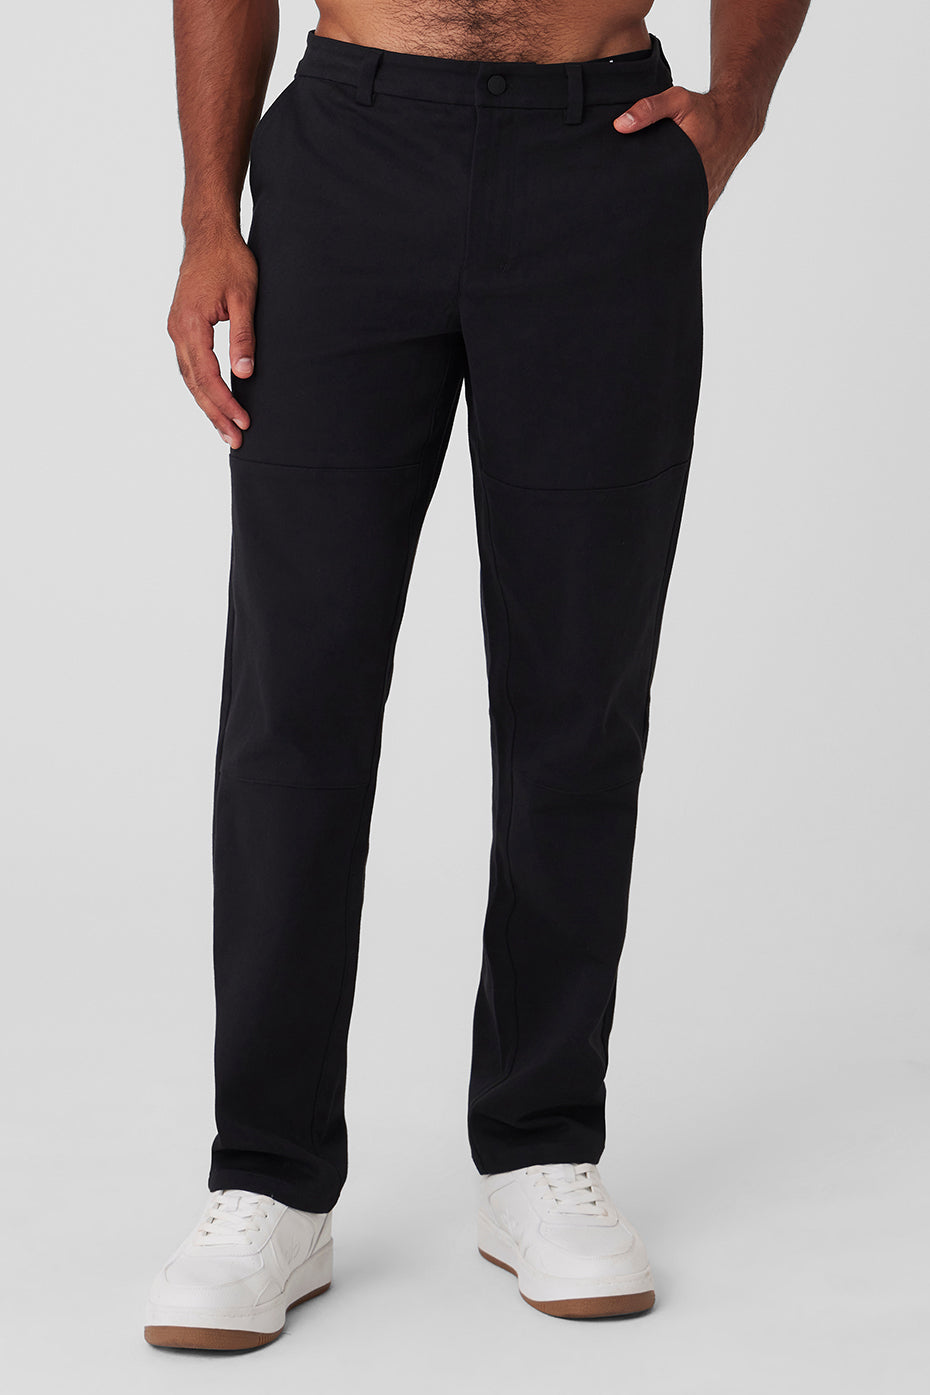 Edition Sueded Pant - Black